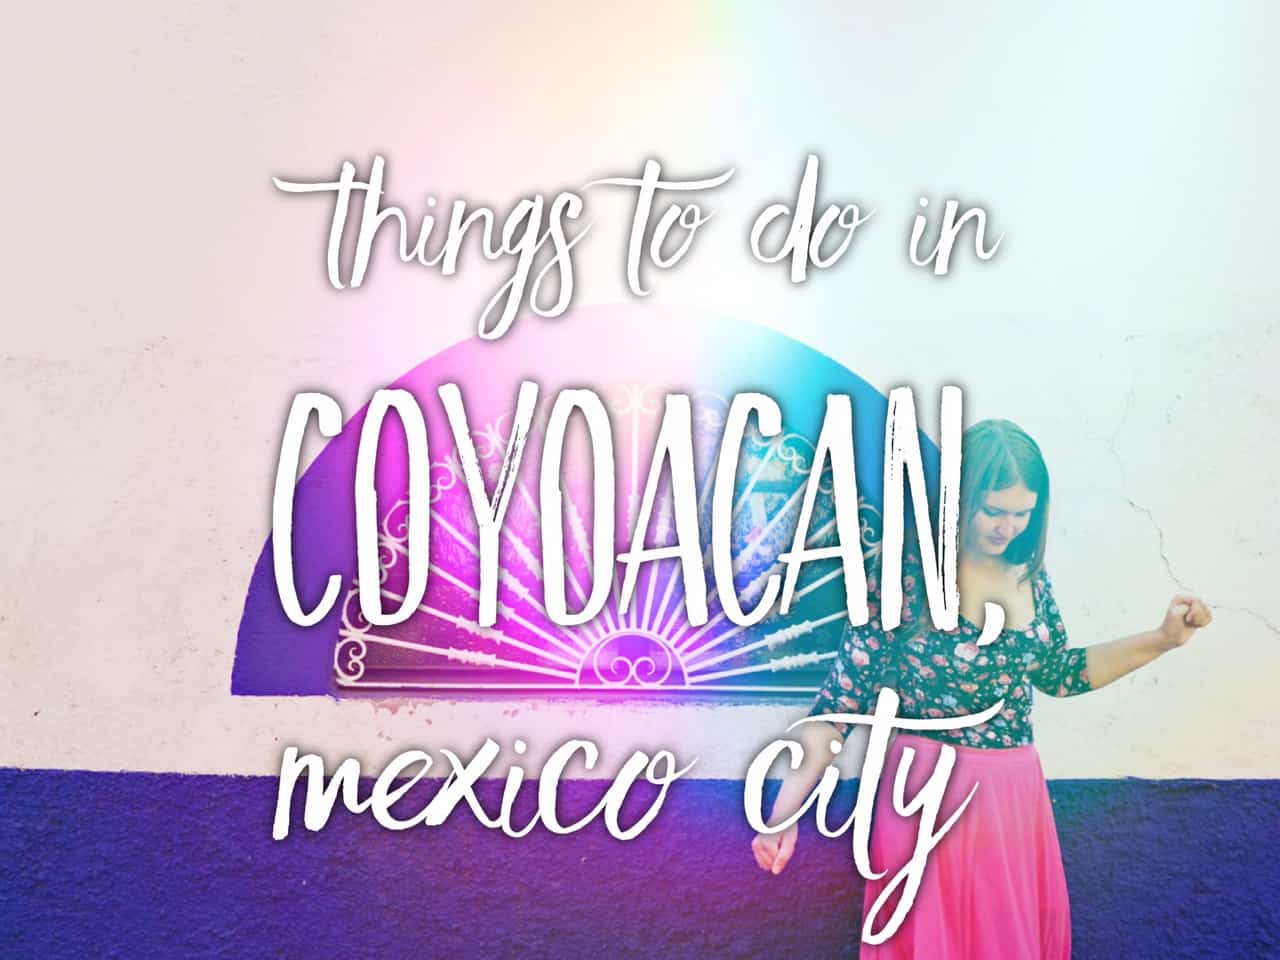 Best place to go in Mexico City & Amazing things to do in Coyoacan